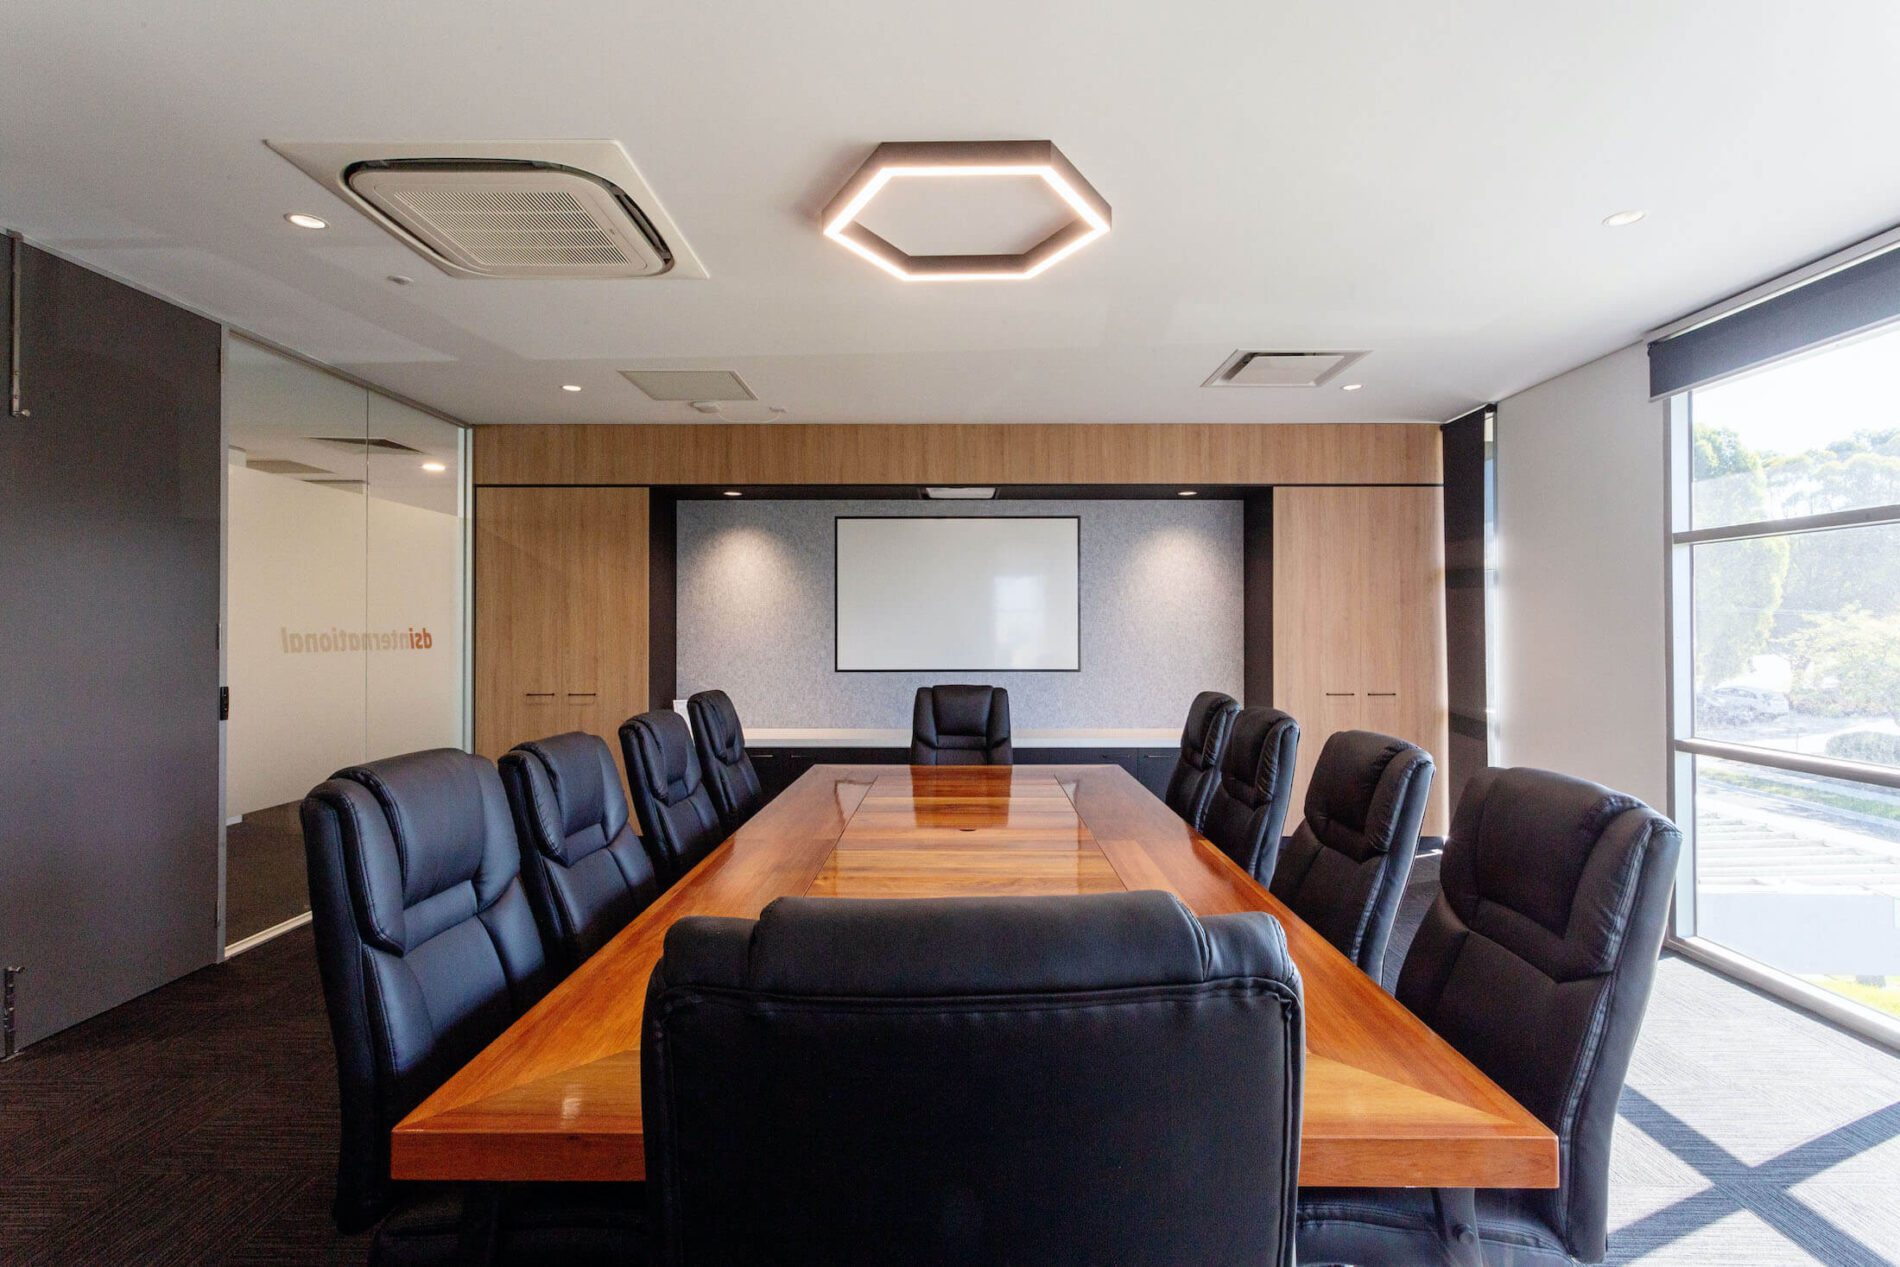 Boardroom with hexagonal light overhead, black chairs, timber table